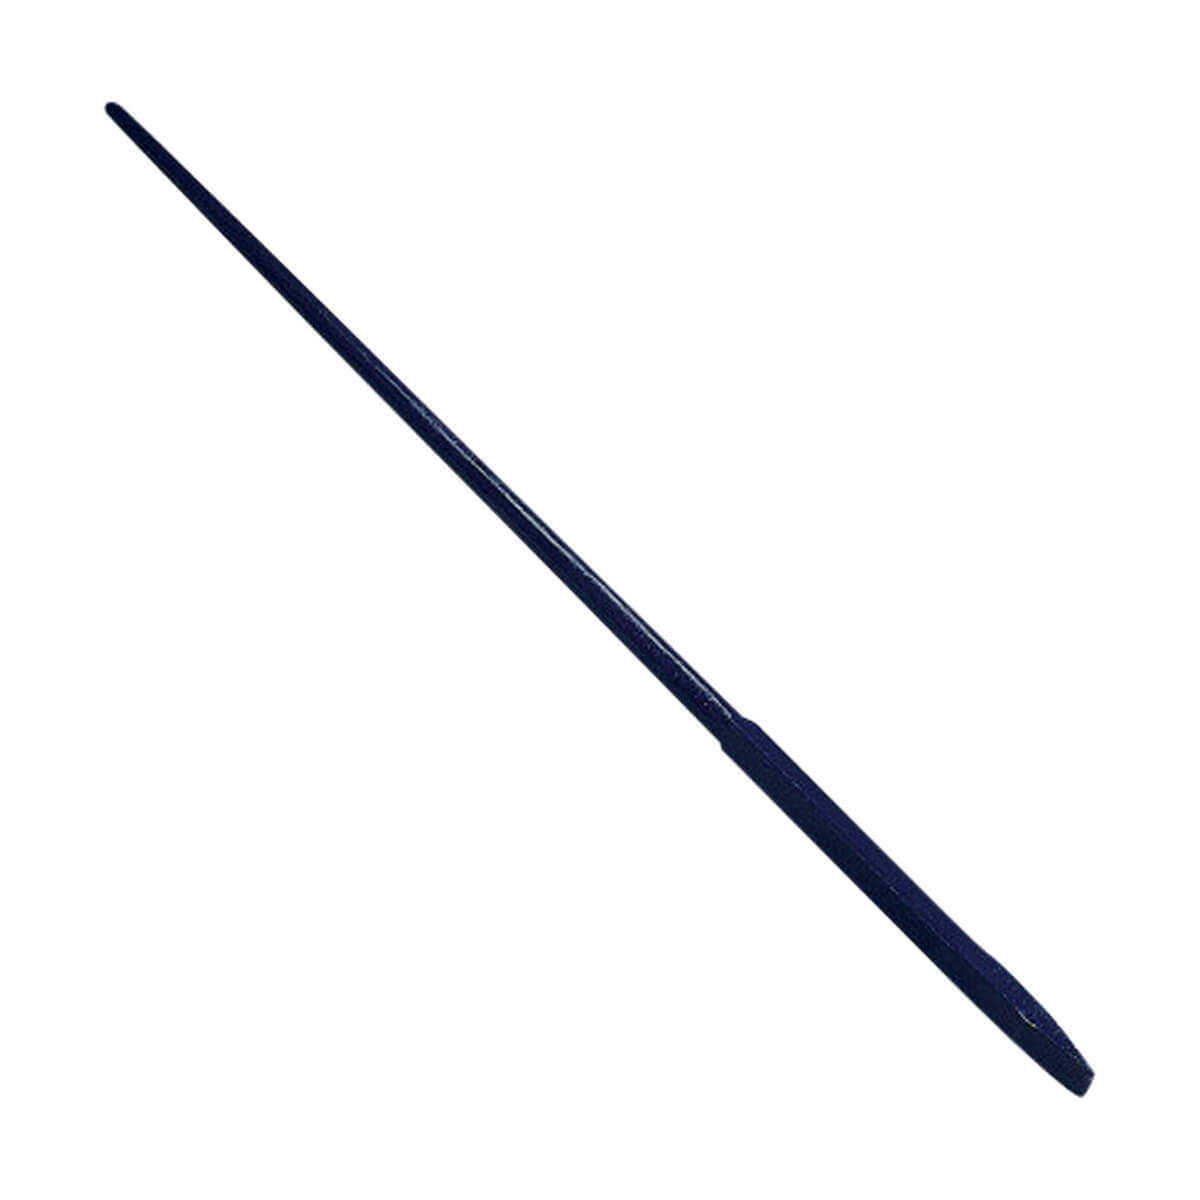 Wedge Point Crowbar - 60-in